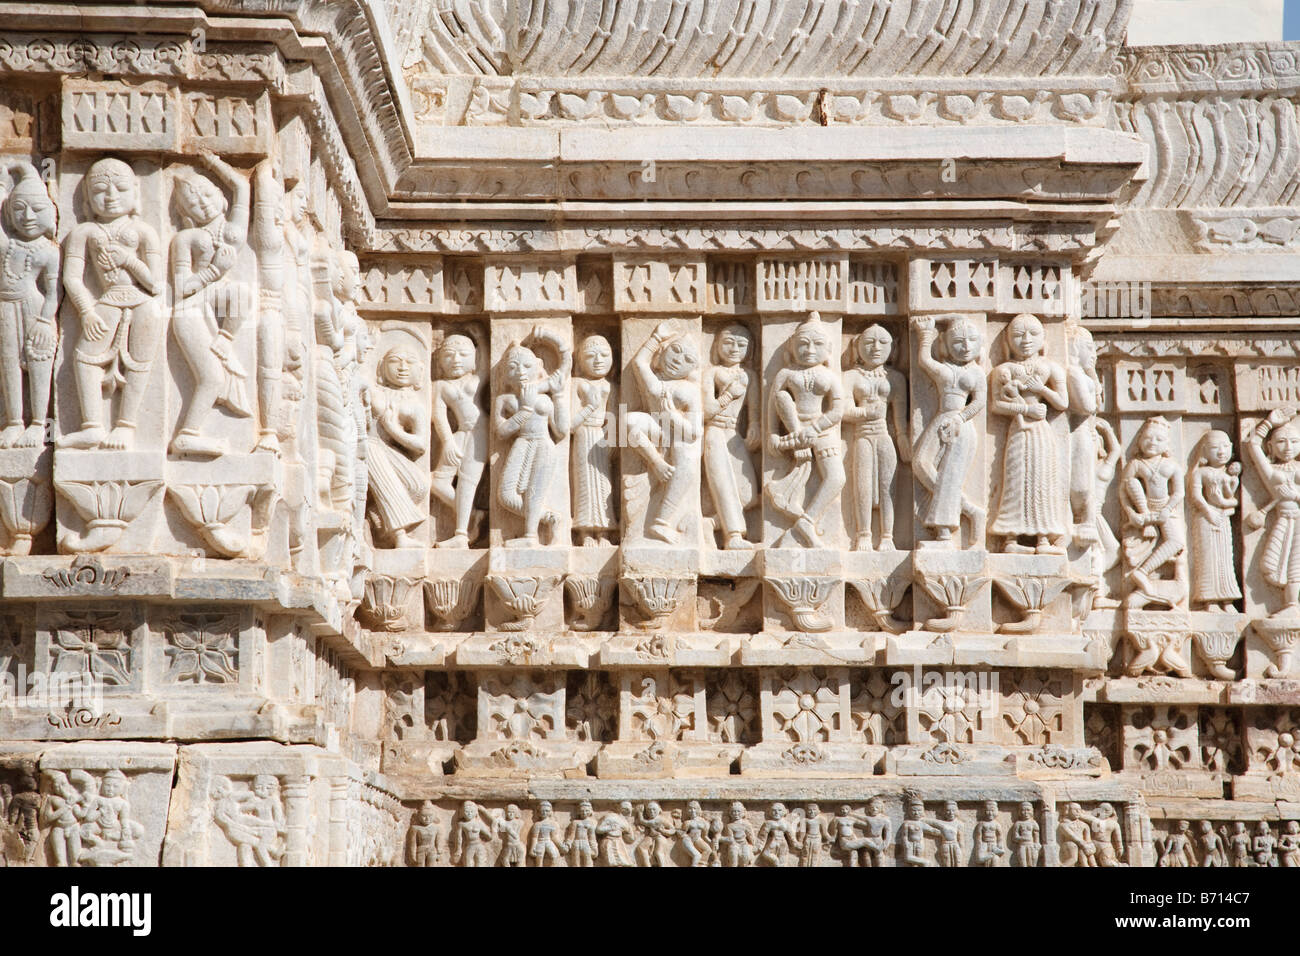 Exterior detail of the Jagdish Temple, Udaipur, Rajasthan, India Stock Photo